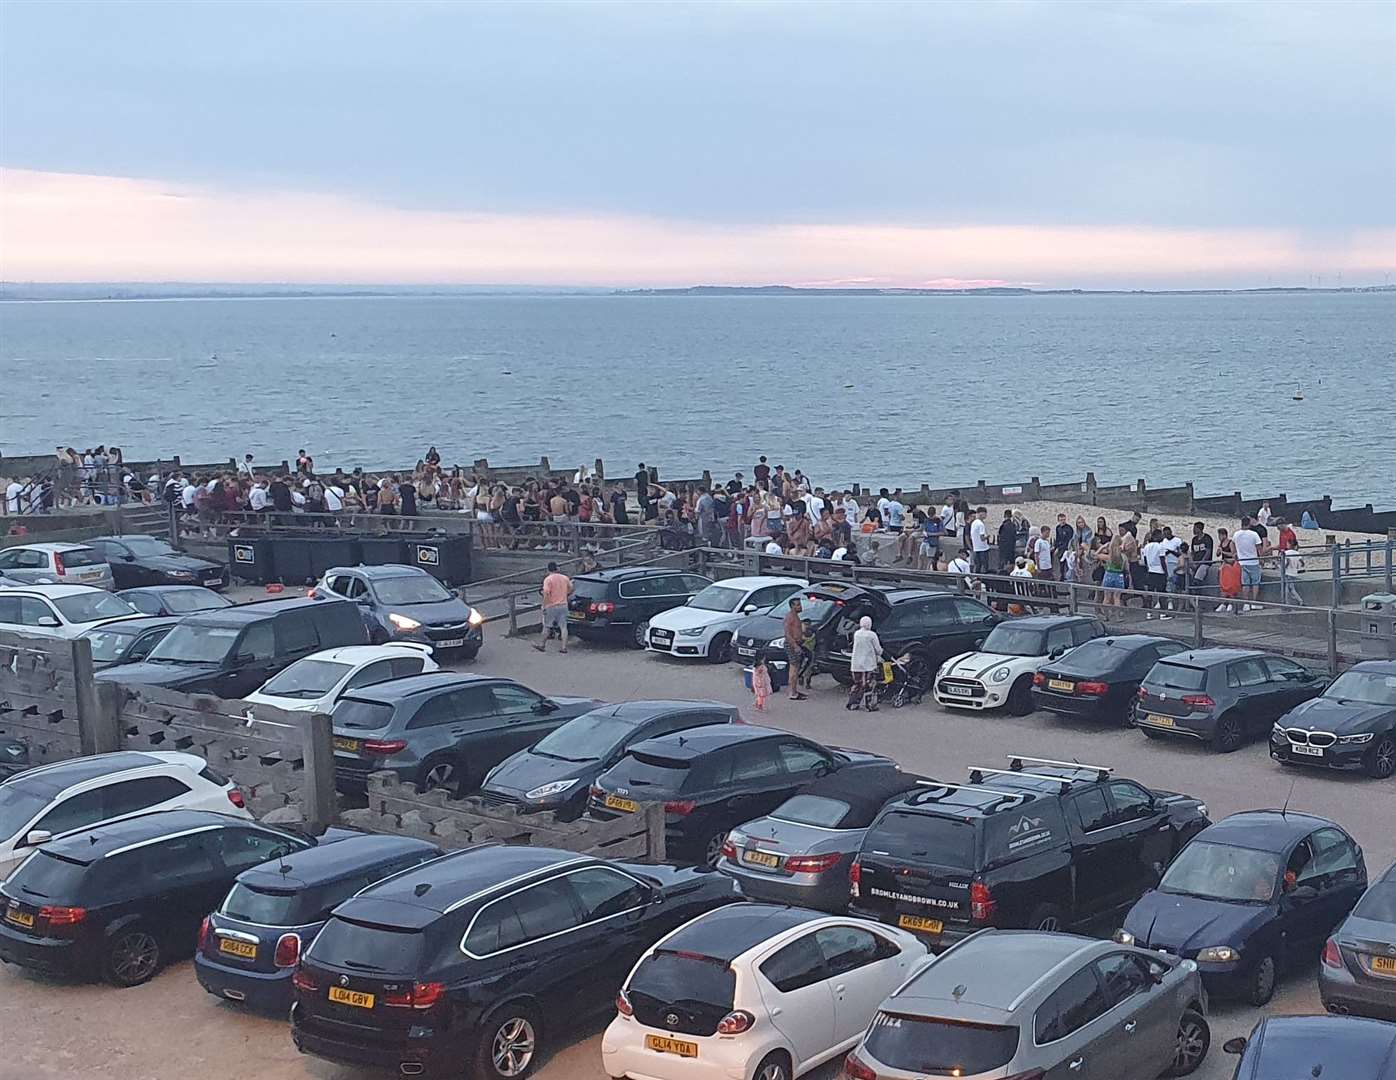 More than 100 people gathered at Whitstable beach on Friday. Picture: Katie Braid